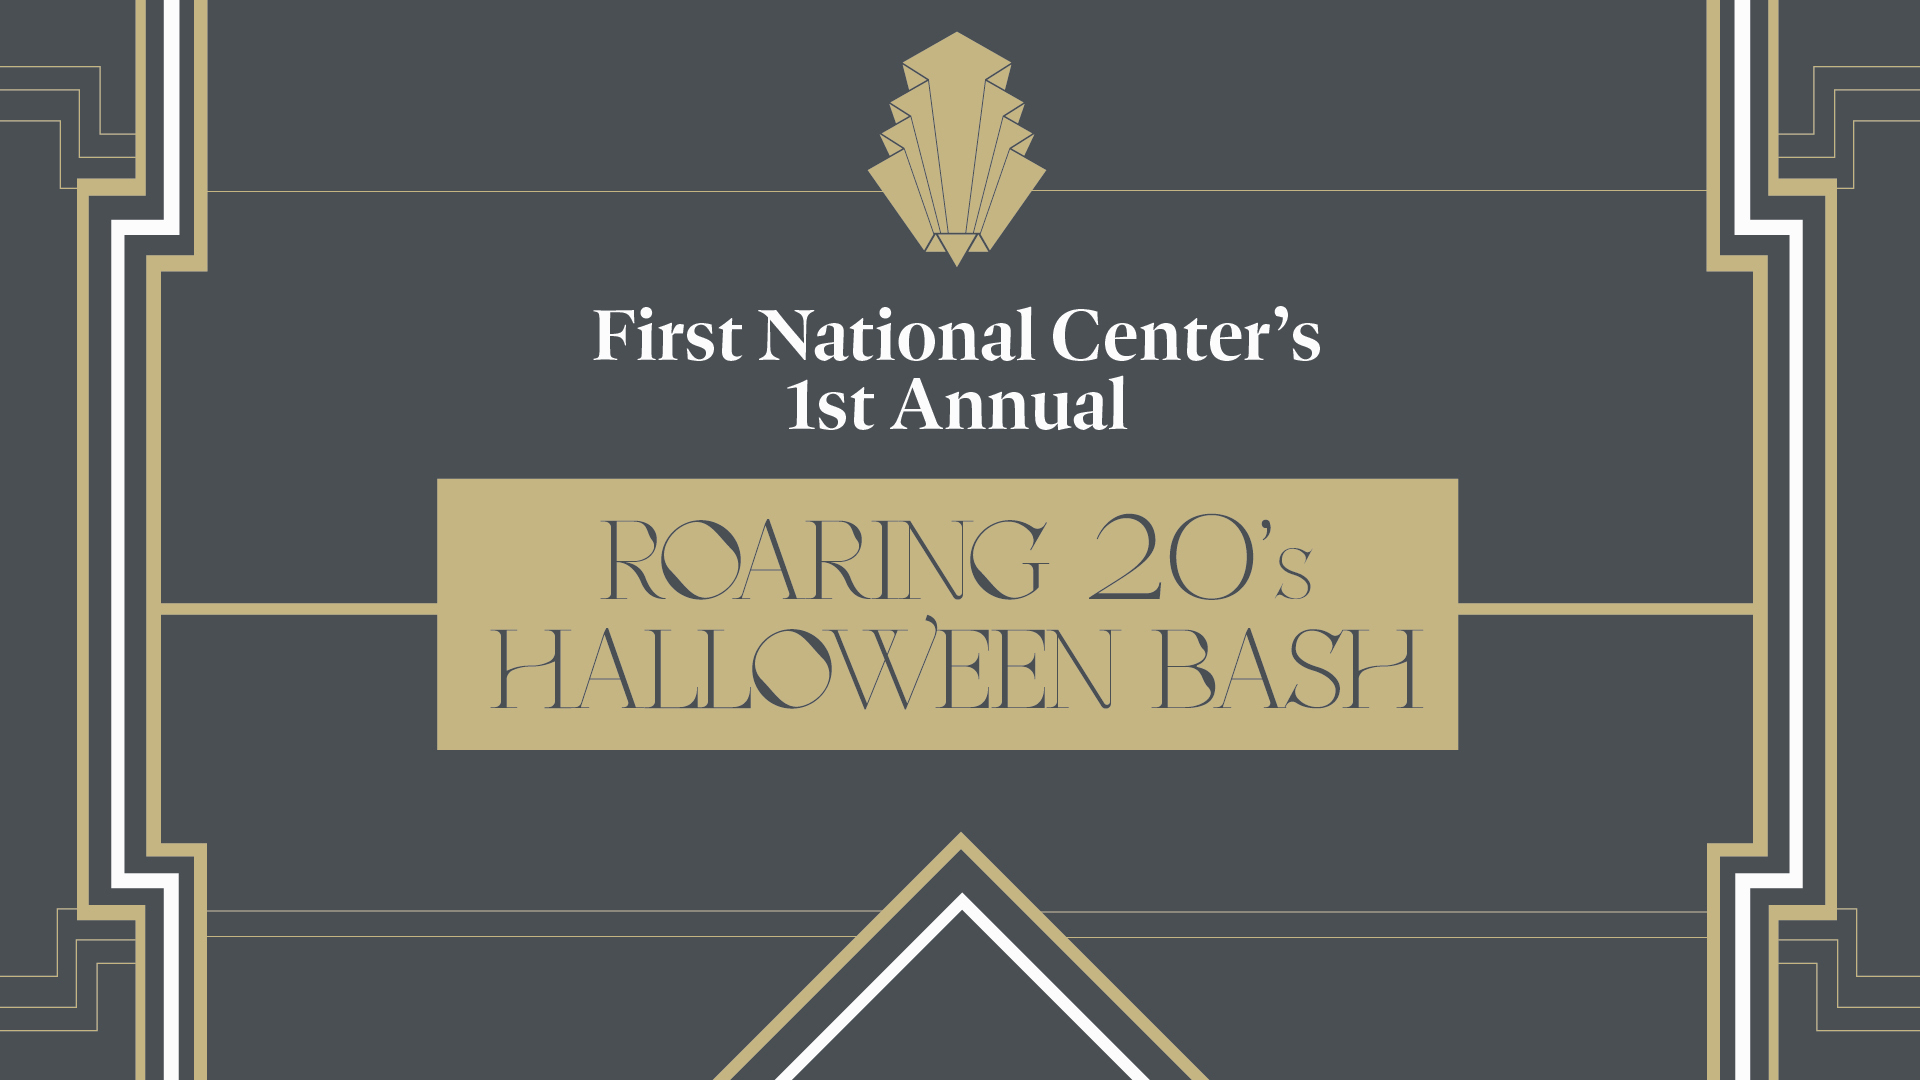 The First National Center Halloween Bash